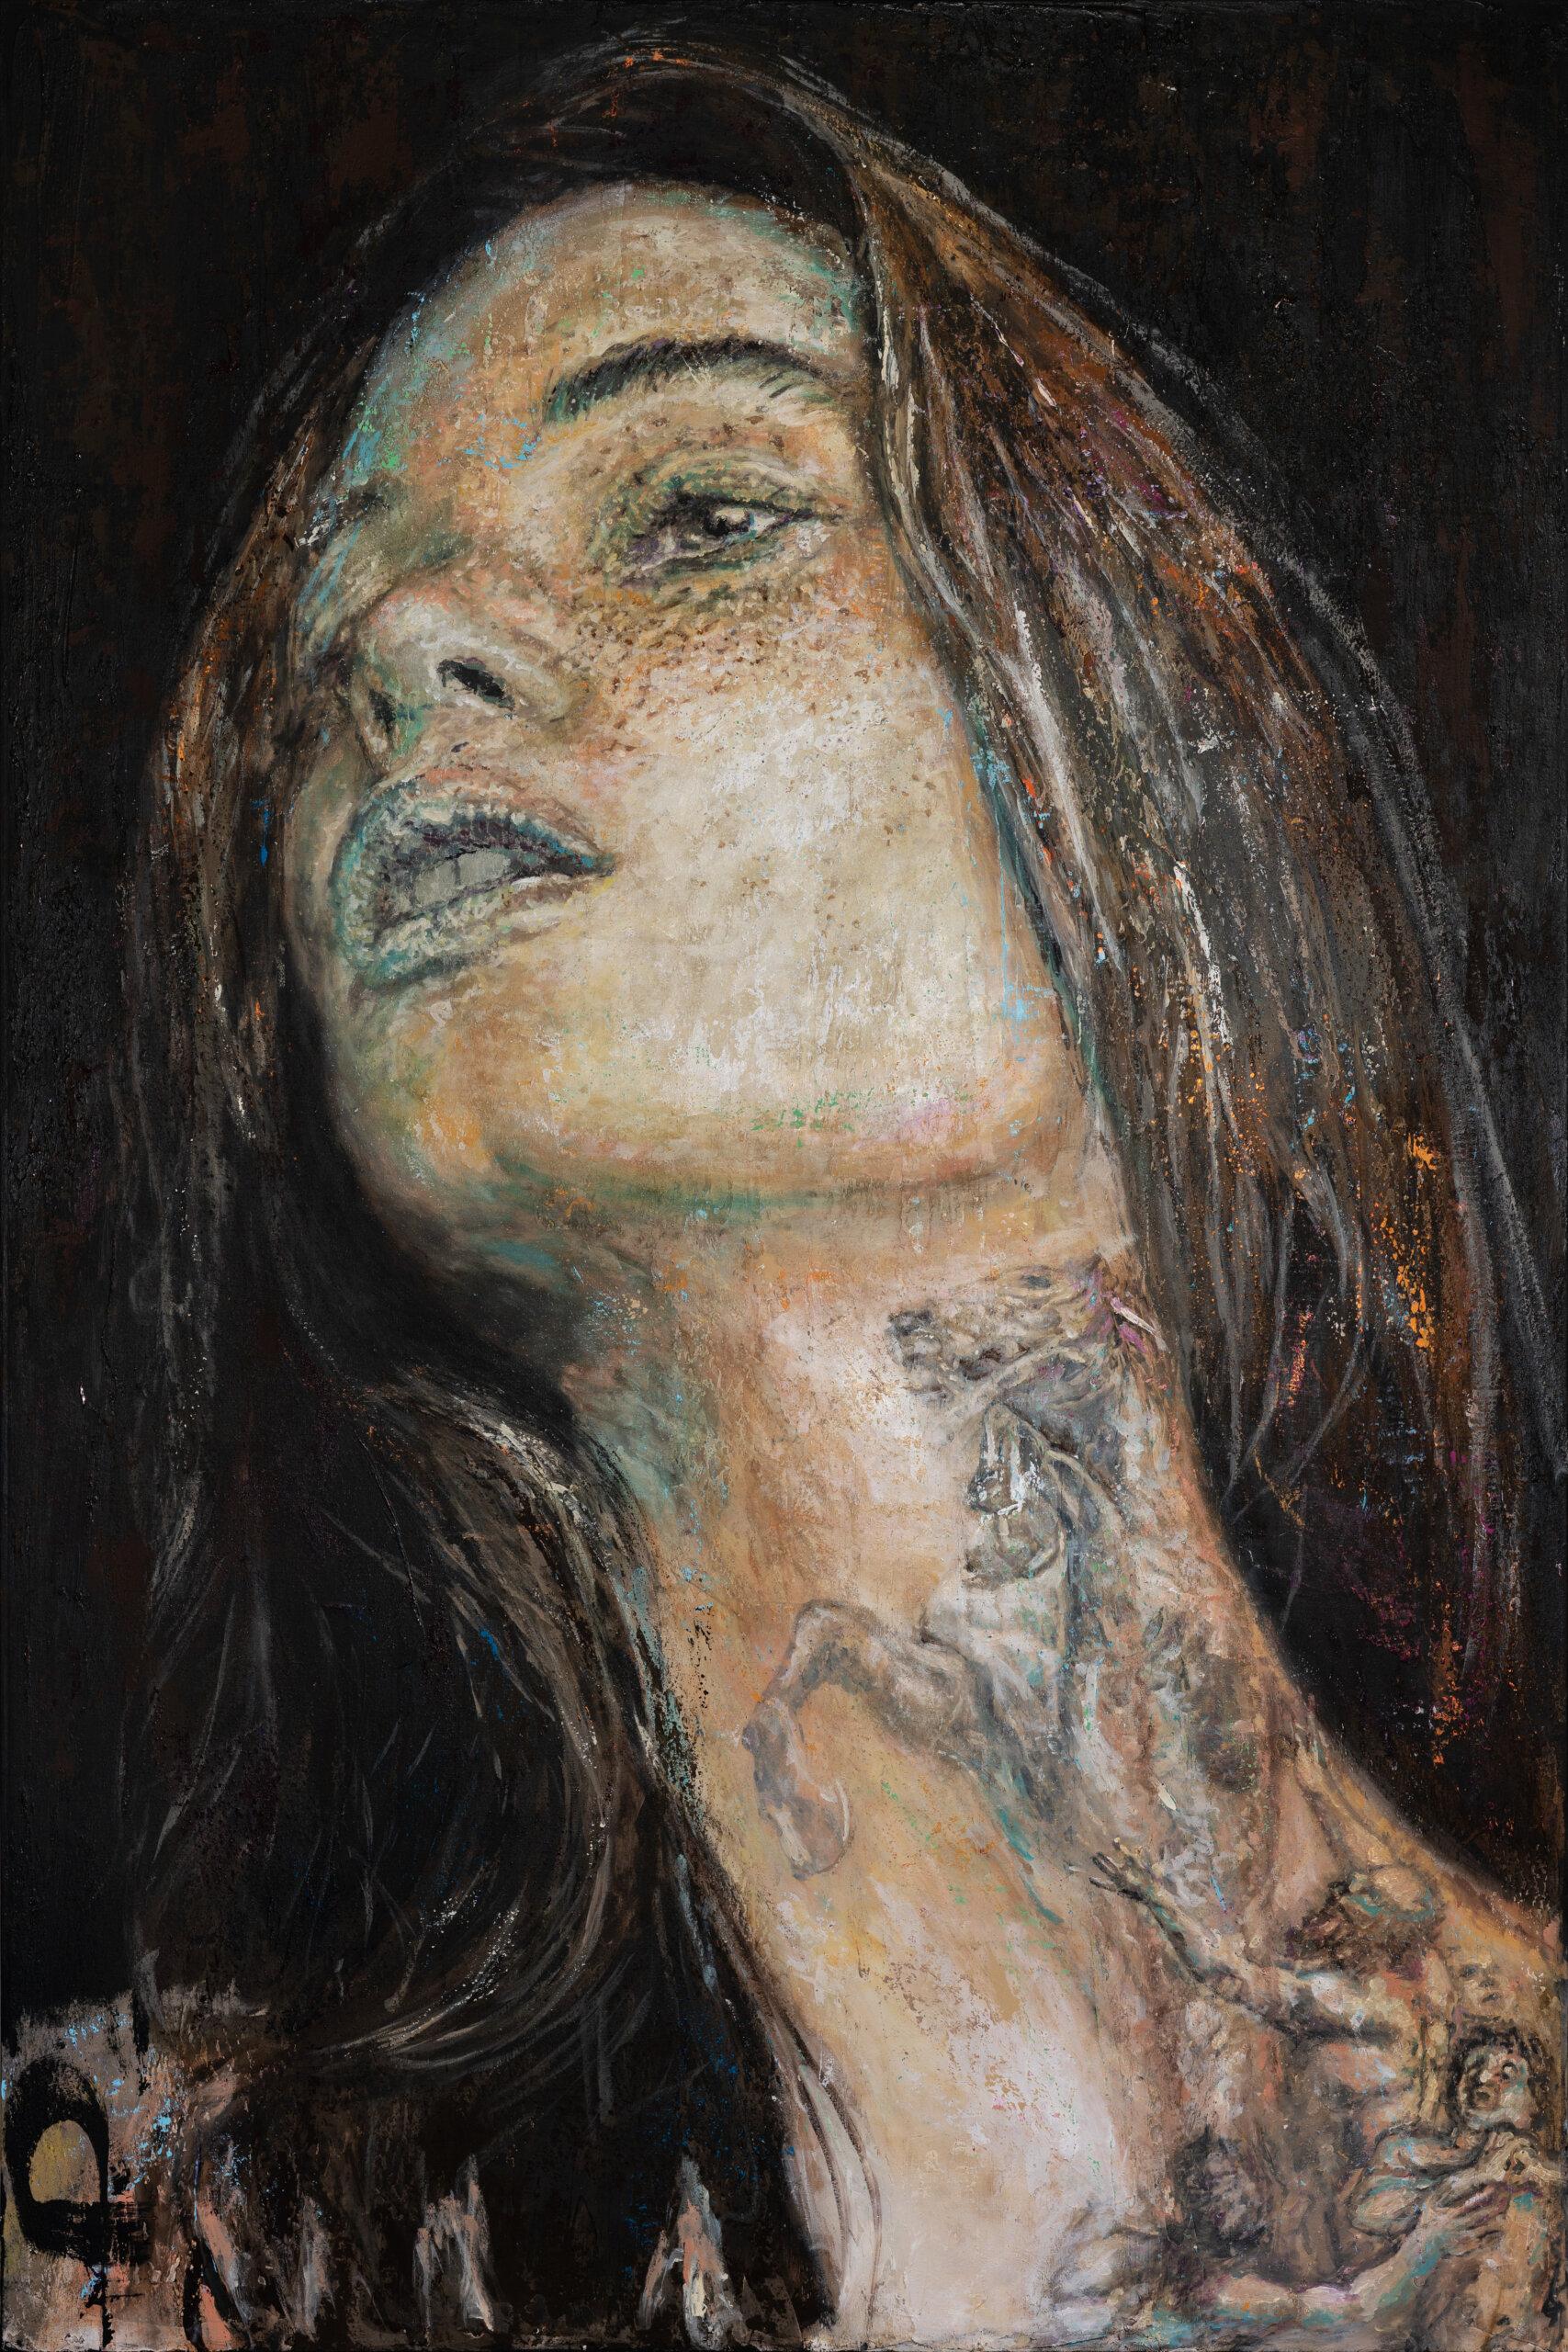 GIRL.09
From his series GIRLS, Girl.09 is a 48” x 72” painting that Labarca created after being inspired by the natural beauty of women. The gorgeous illuminated face emerges from a dark background and highlights the details of the tattoo on her